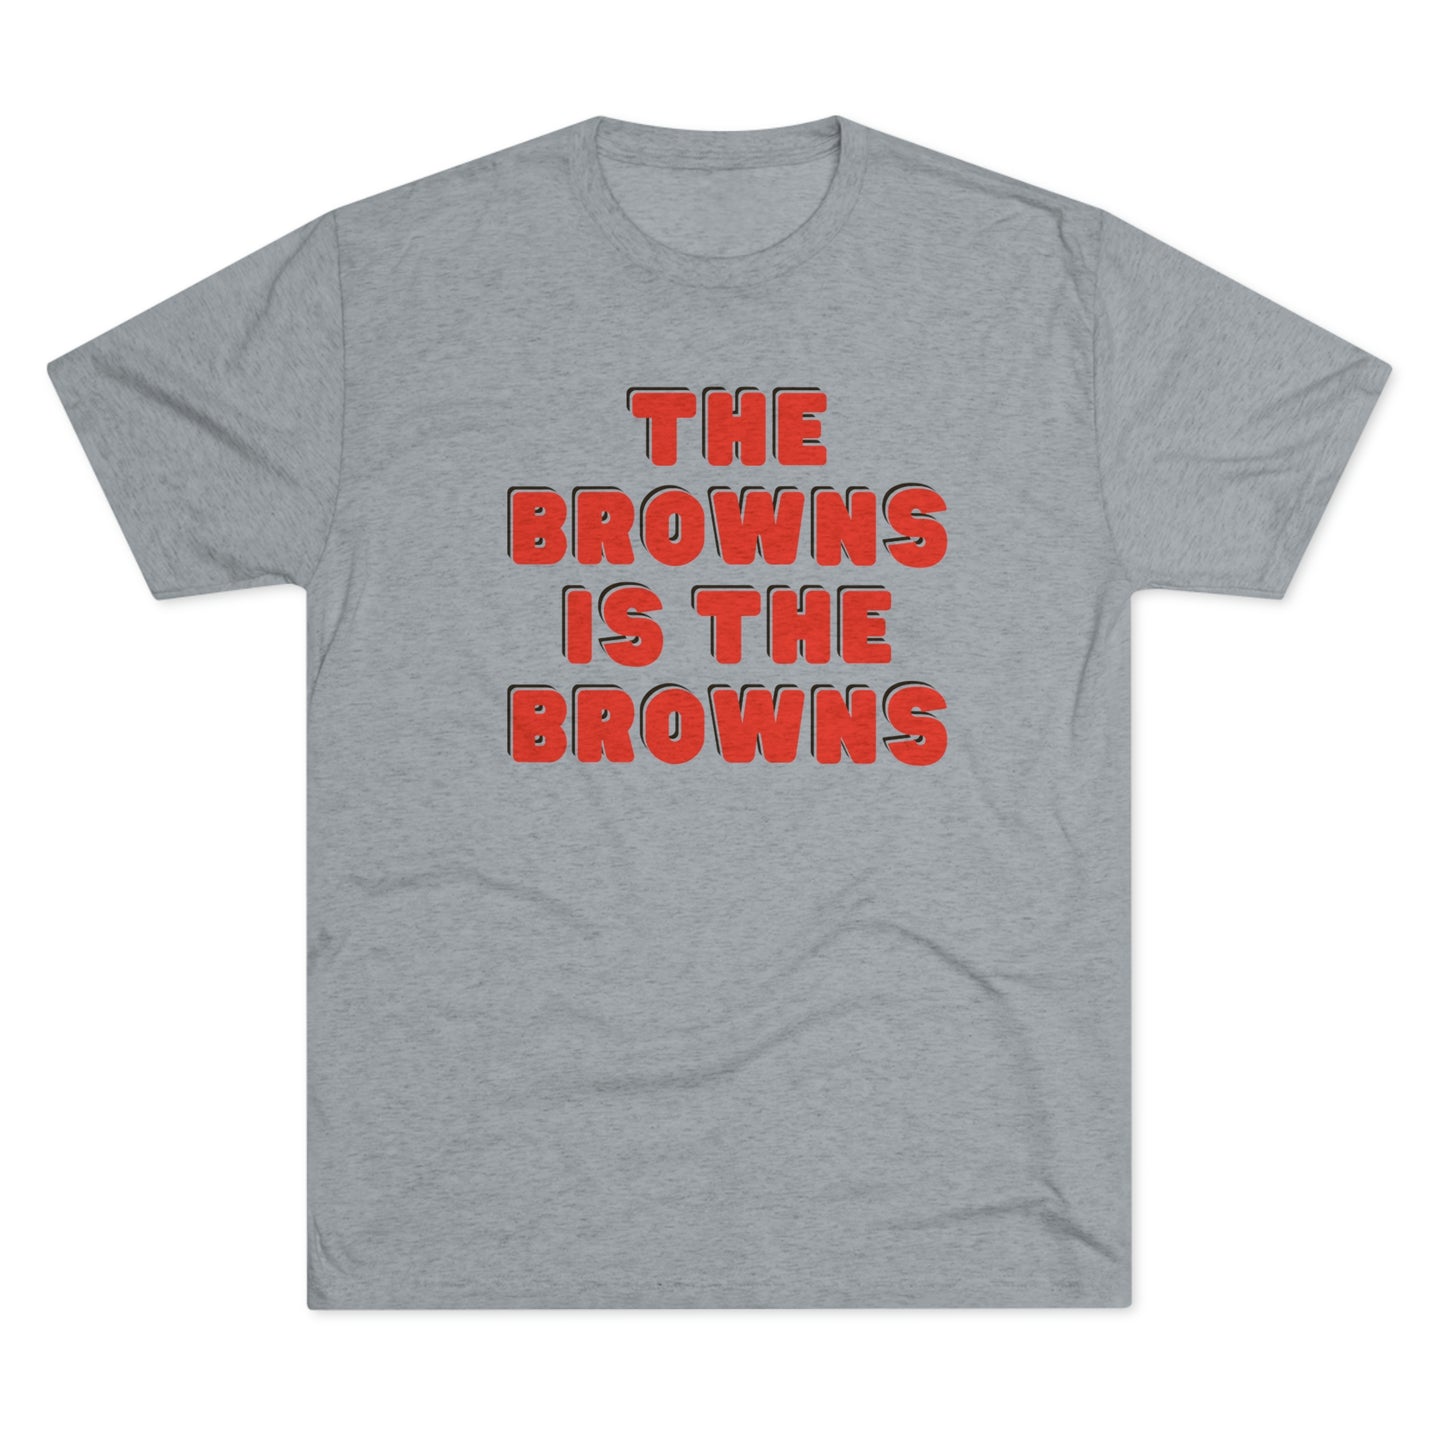 THE BROWNS IS THE BROWNS-Unisex Tri-Blend Crew Tee